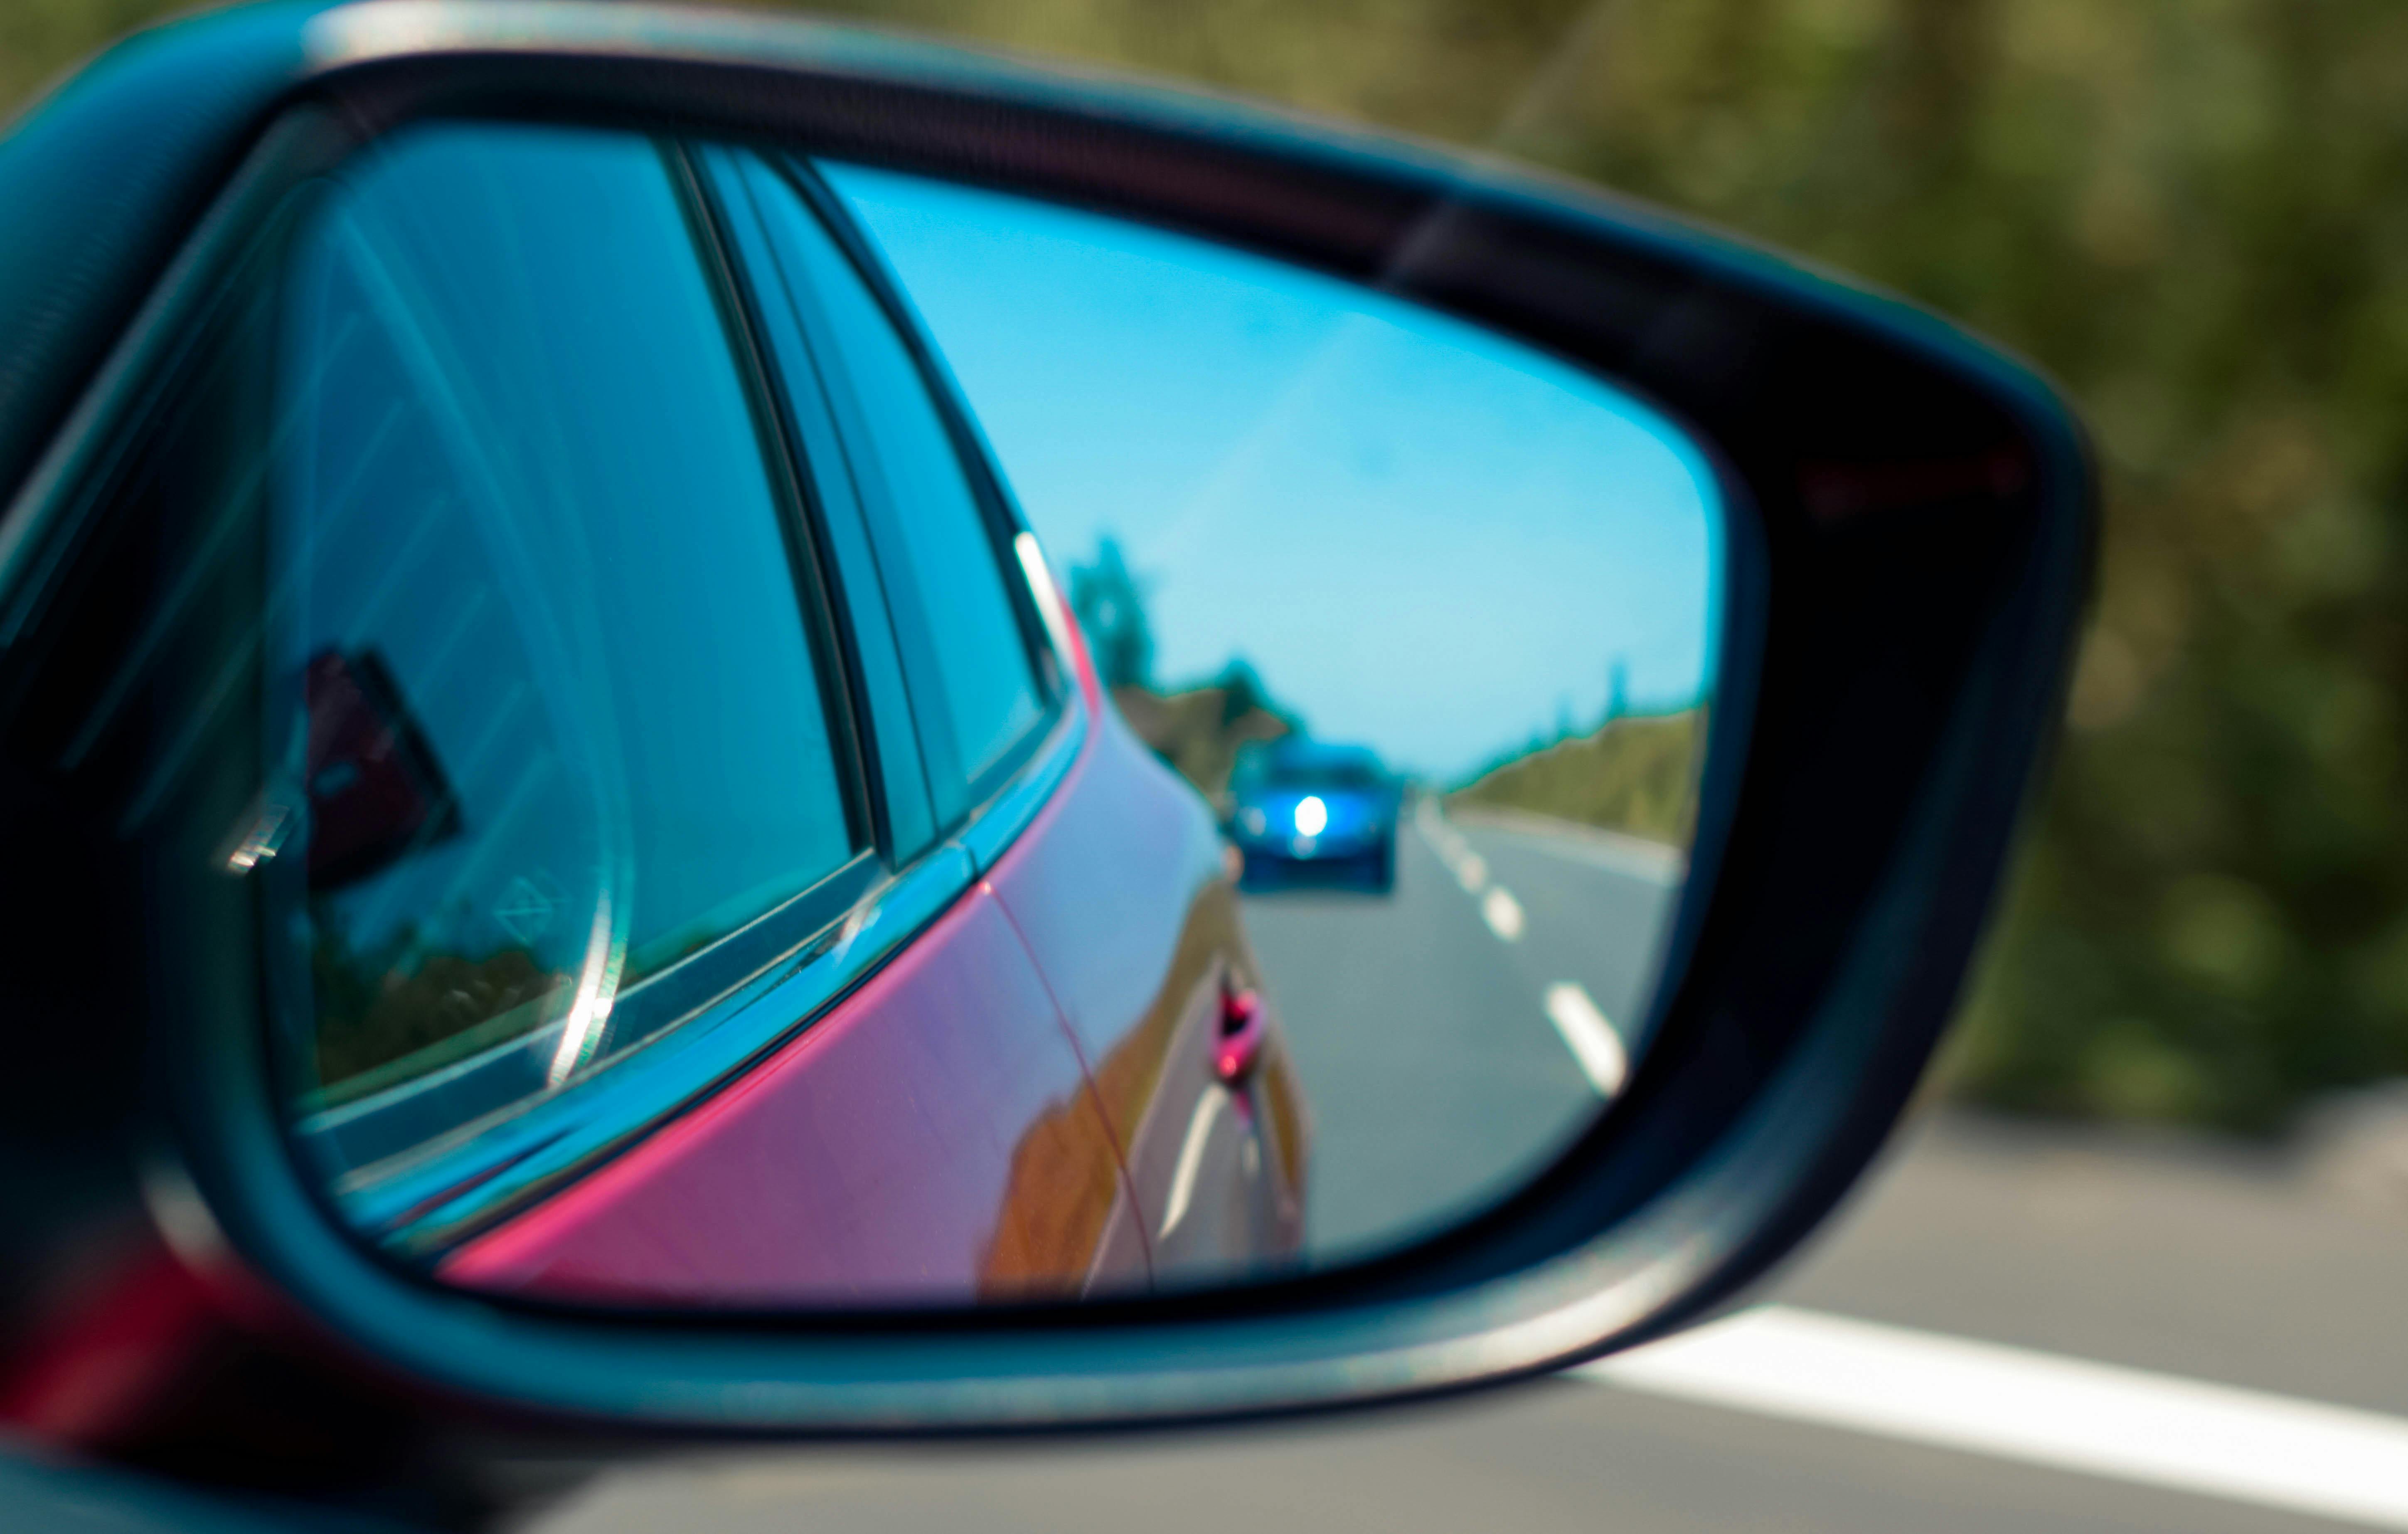 Free stock photo of car window, cars, rearview mirror